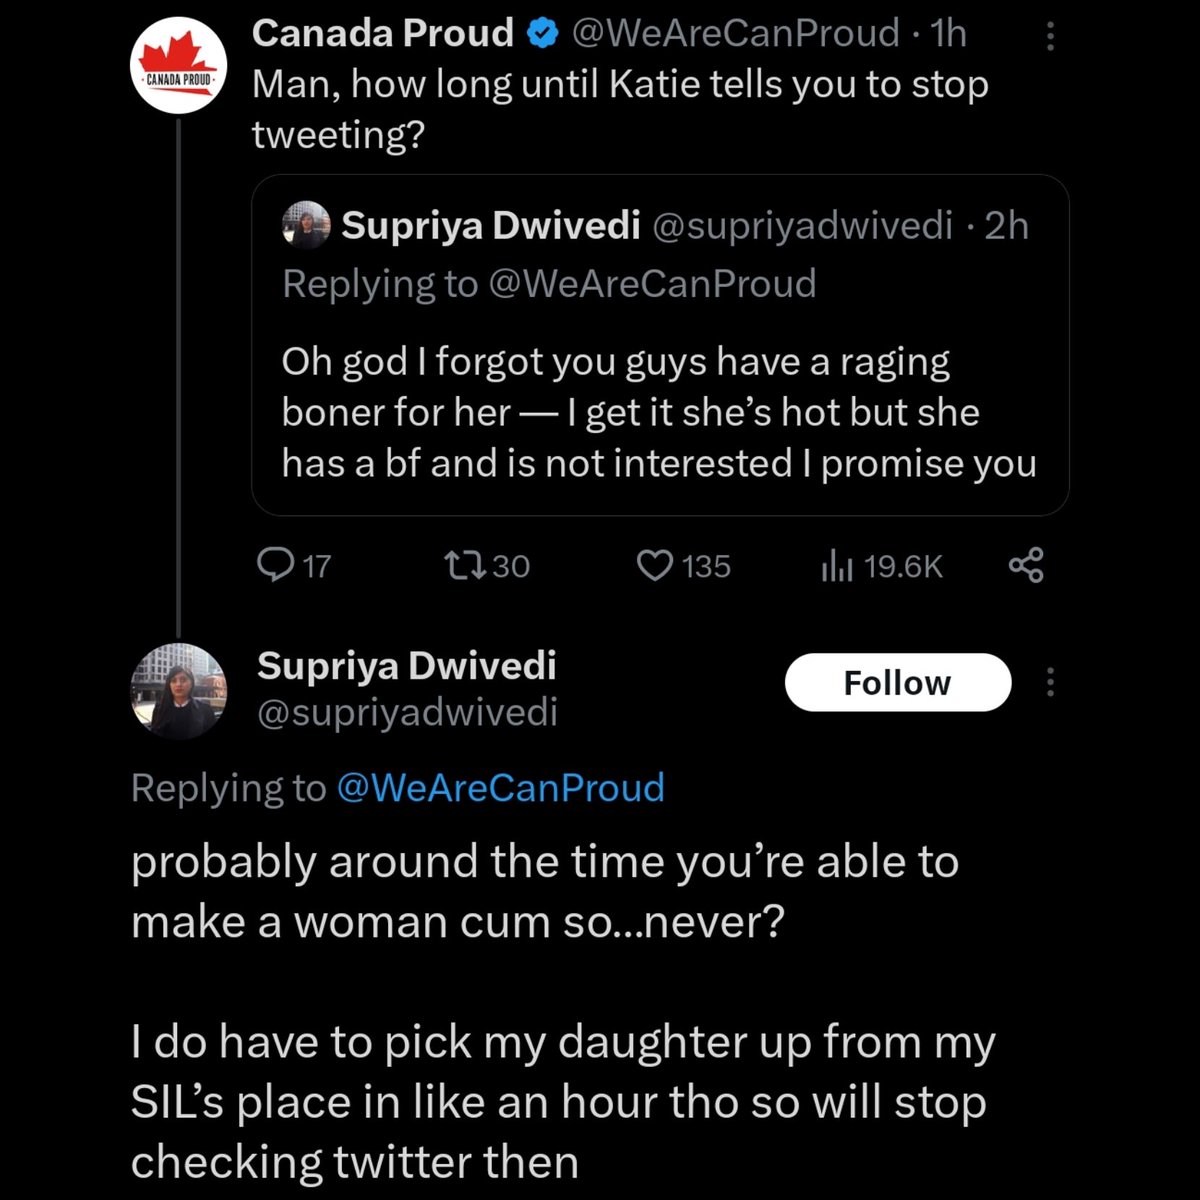 Update: My Government has just hired a new Director of Online Politeness. In her new role, @supriyadwivedi will berate, swear at, and divide Canadians as much as possible, in accordance with @liberal_party policy. Welcome to the team, and keep up the great/hate work!